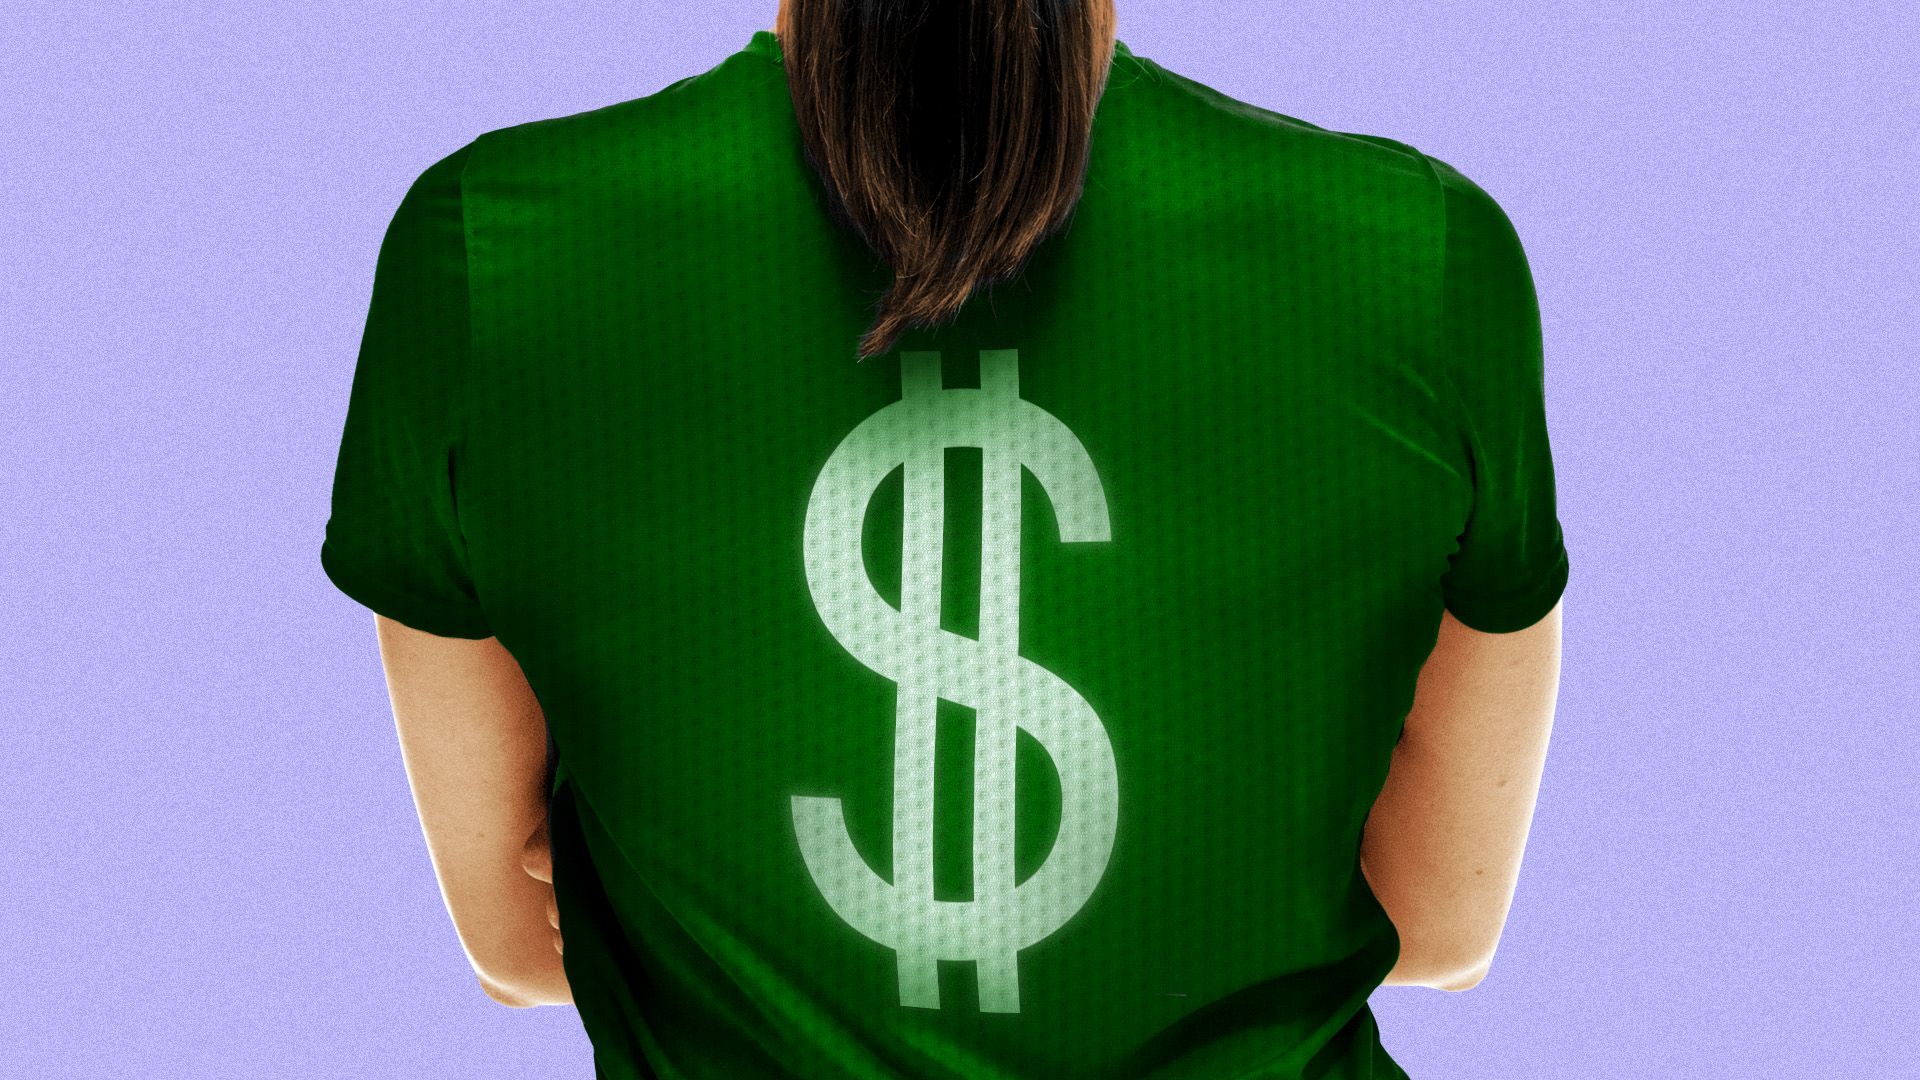 Illustration of a woman from behind with a dollar sign on the back of her sports jersey